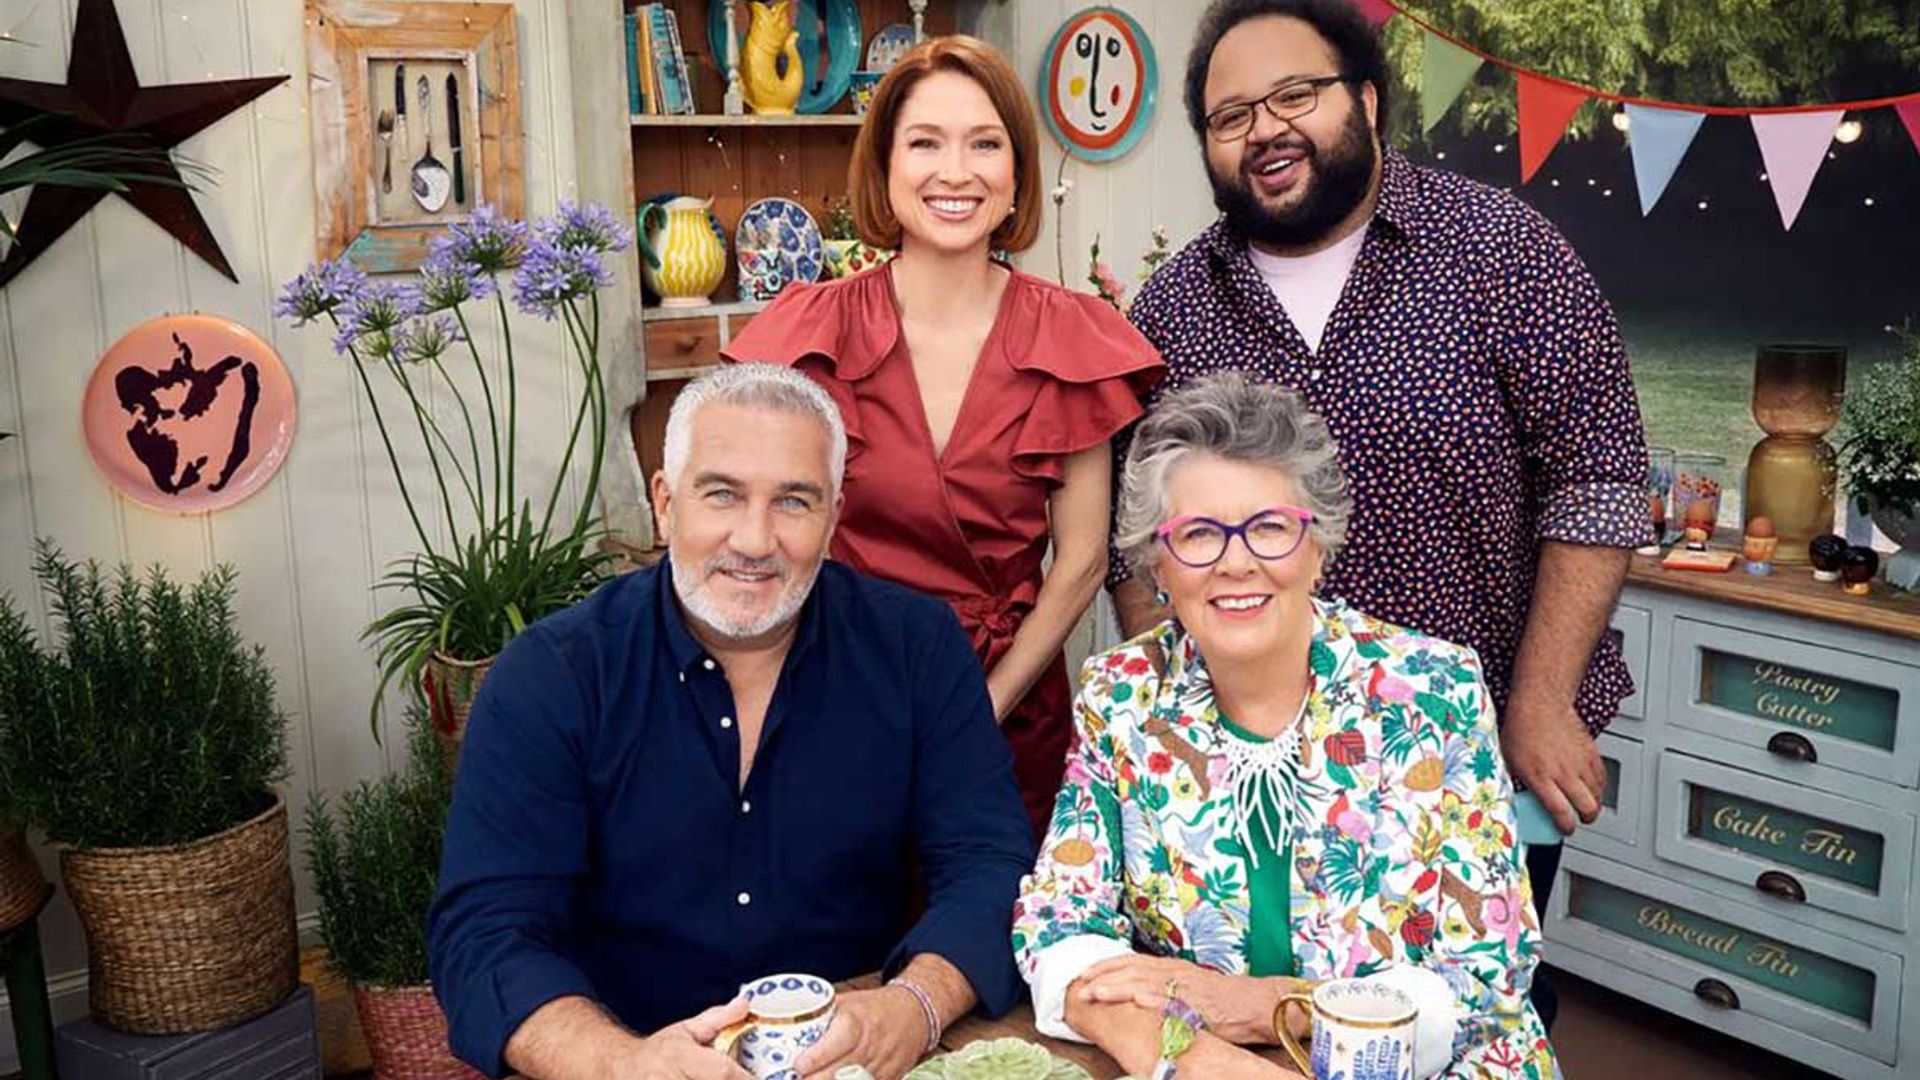 The Great American Baking Show all you need to know, release date